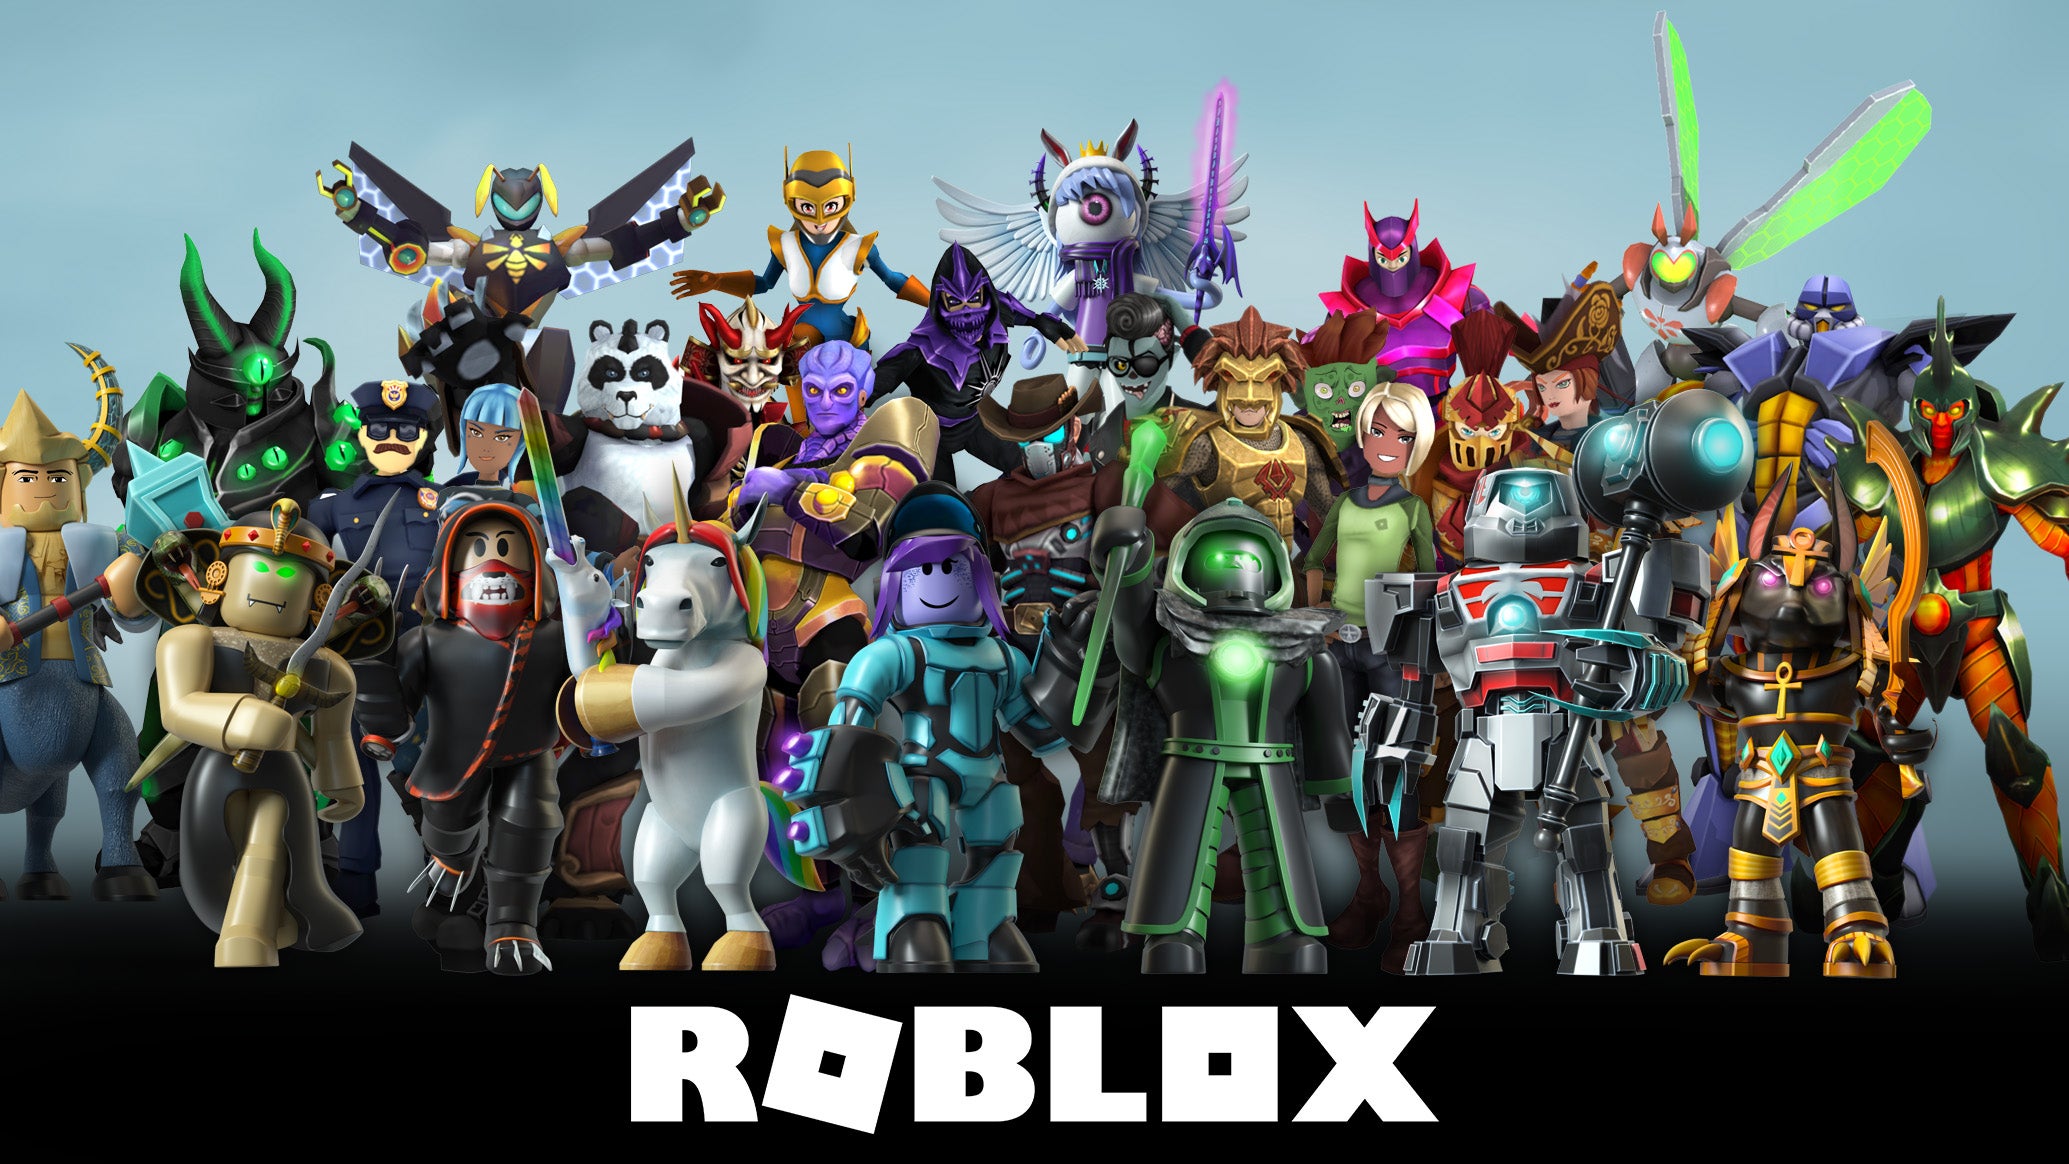 Roblox's Console Evolution: PlayStation Debut, Realistic Avatars: What's  Next for Gamers? - Roblox (NYSE:RBLX) - Benzinga